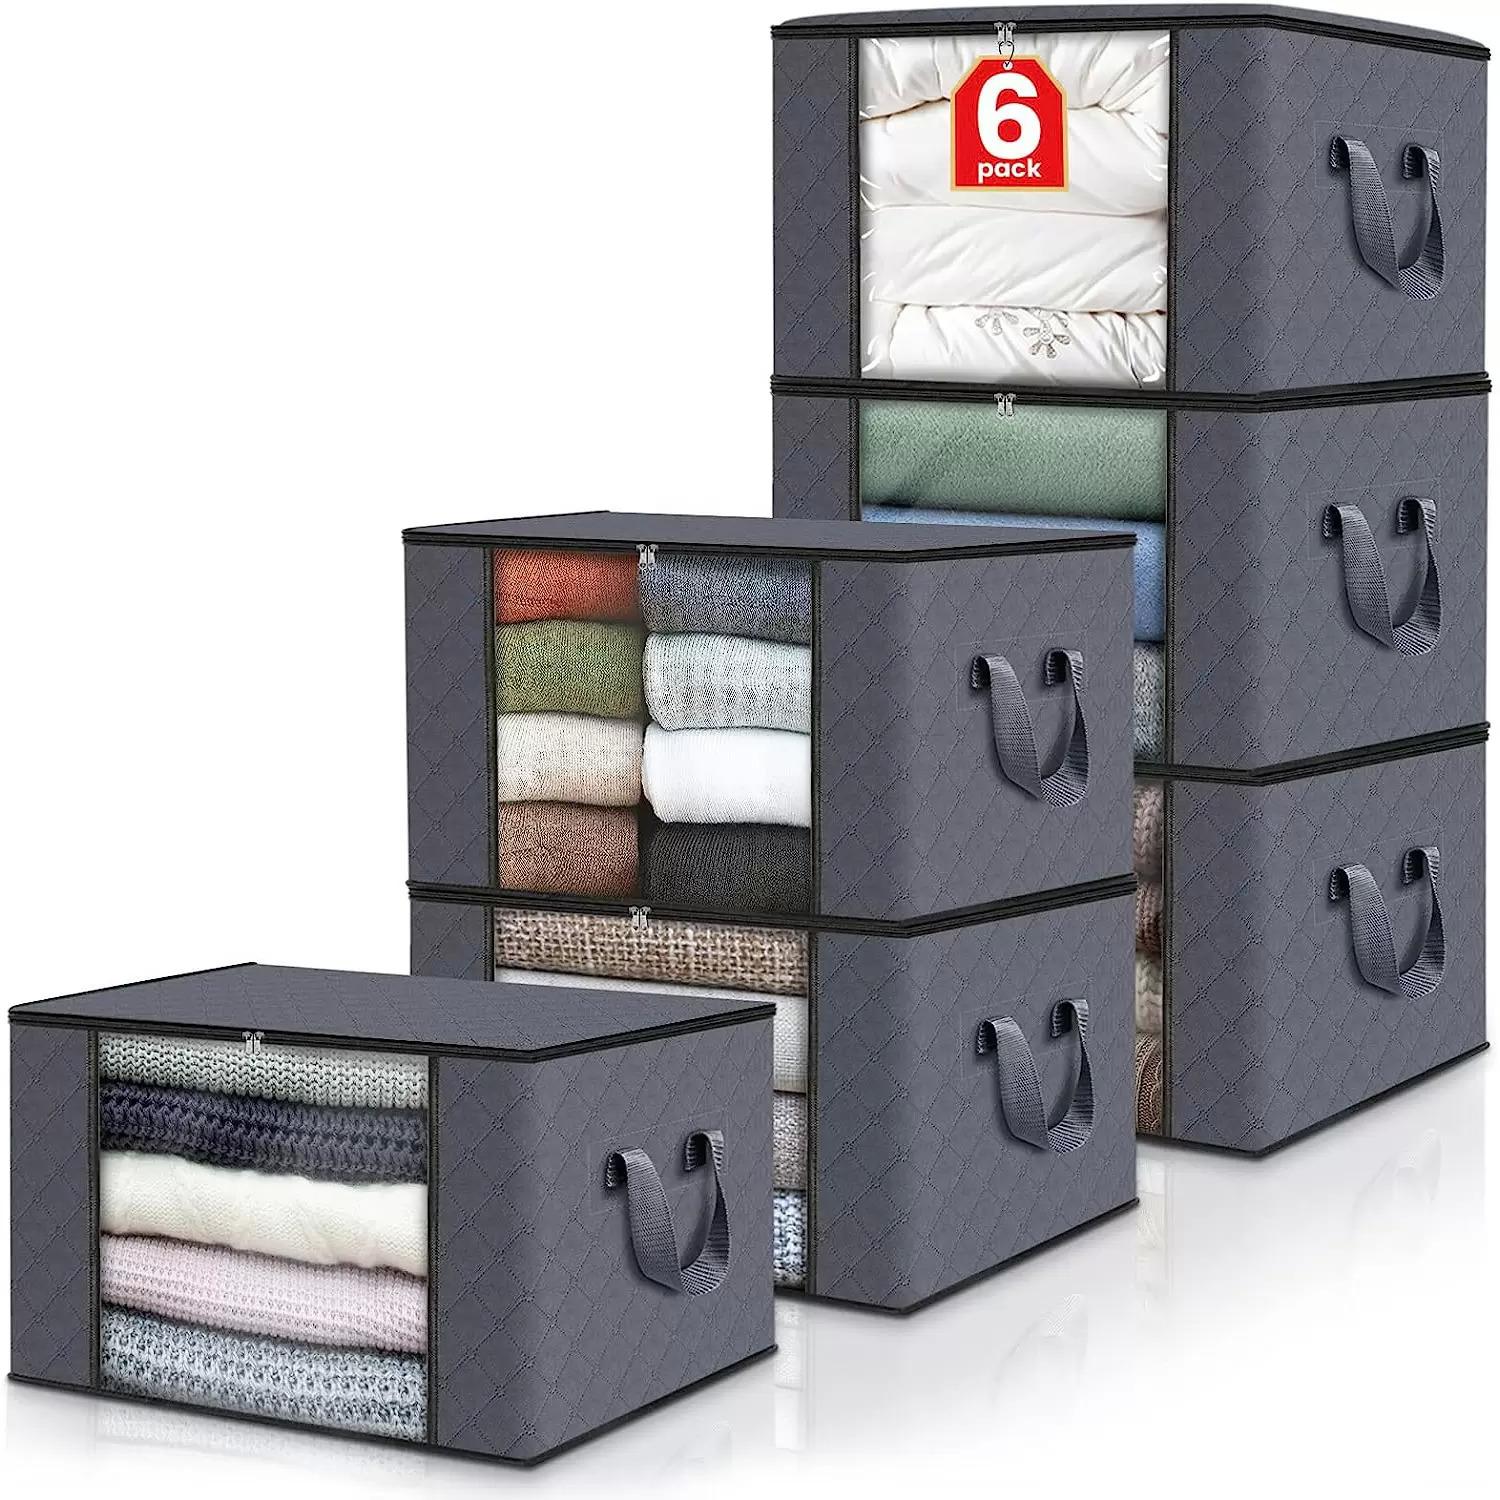 Fab Totes 60L Foldable Clothes/Blanket Storage Bags 6 Pack for $17.99